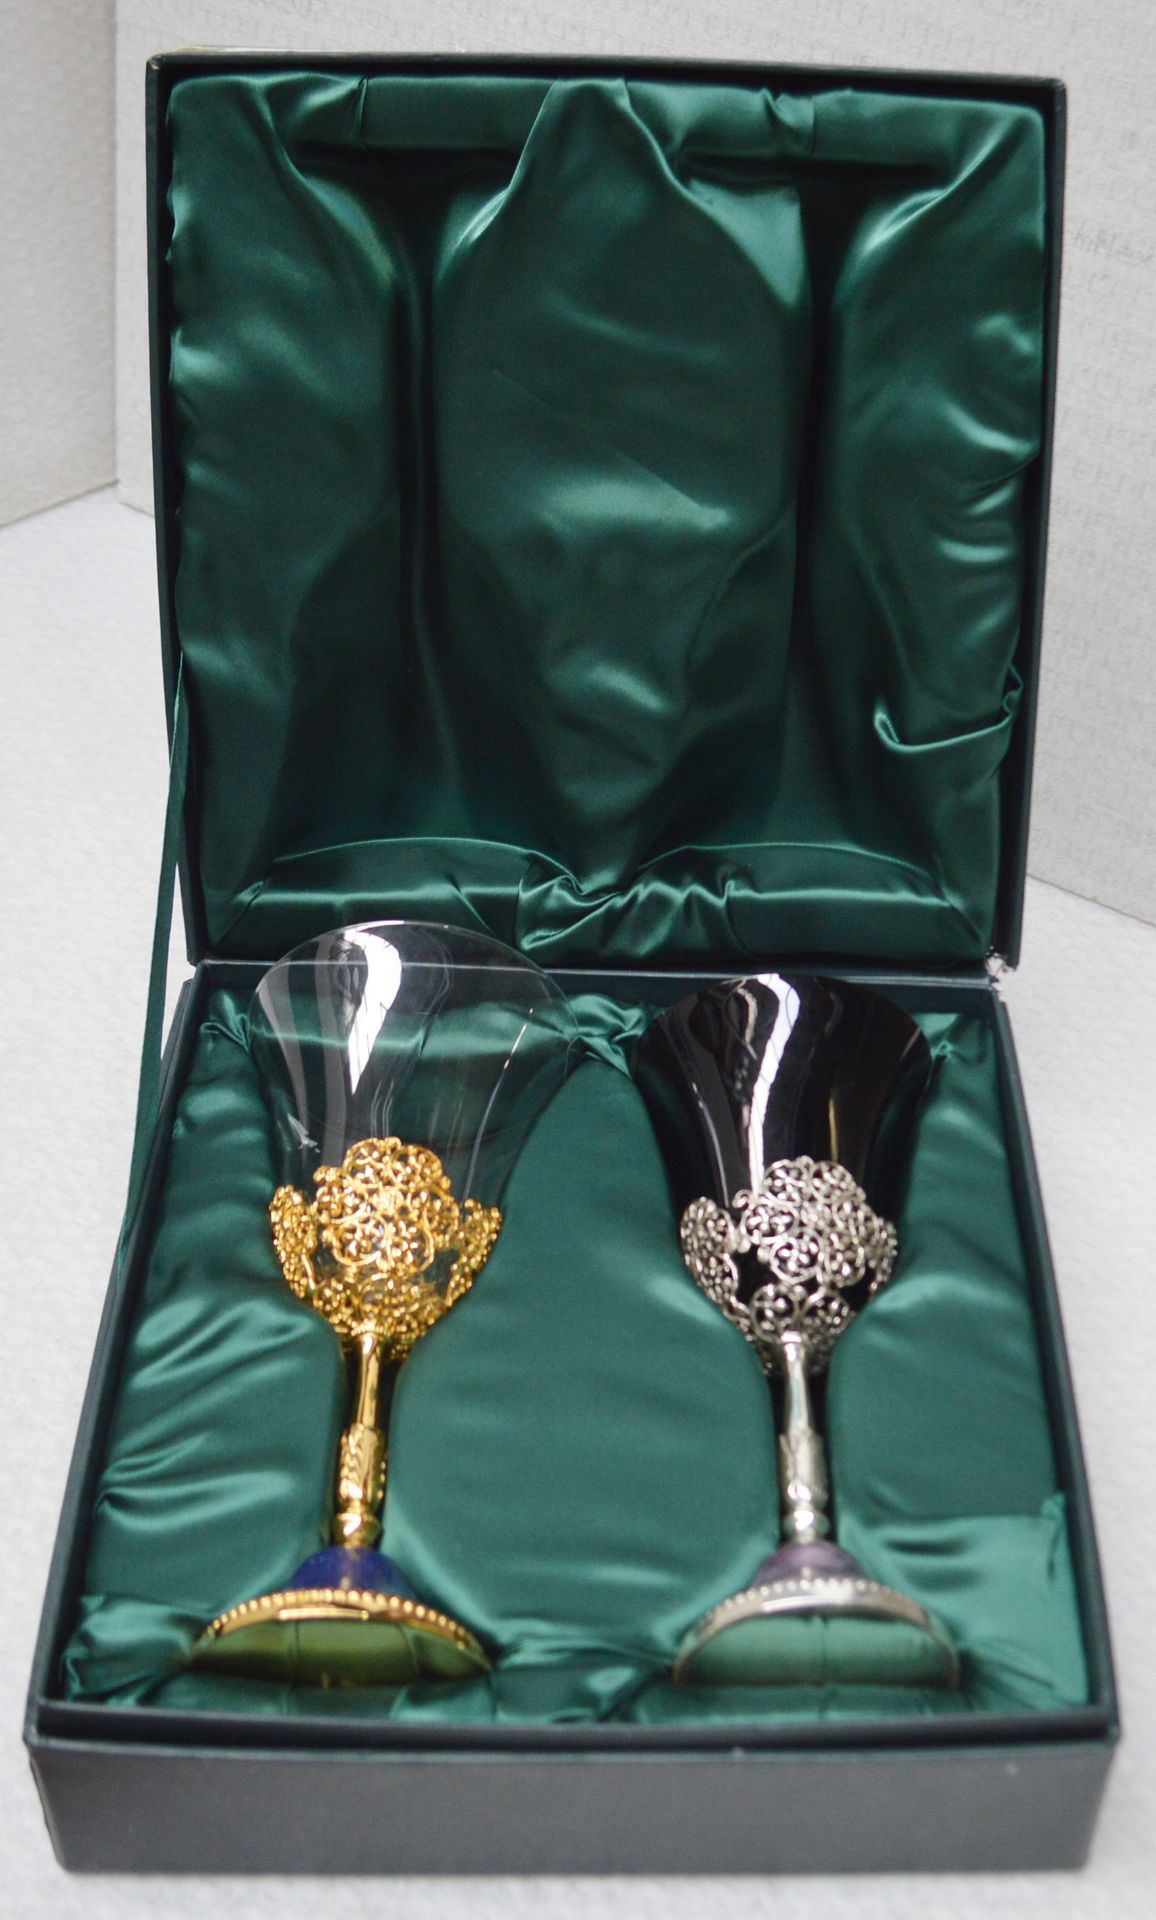 2 x BALDI 'Home Jewels' Italian Hand-crafted Crystal FONTAINEBLEAU Water Goblets - RRP £1,289 - Image 3 of 4